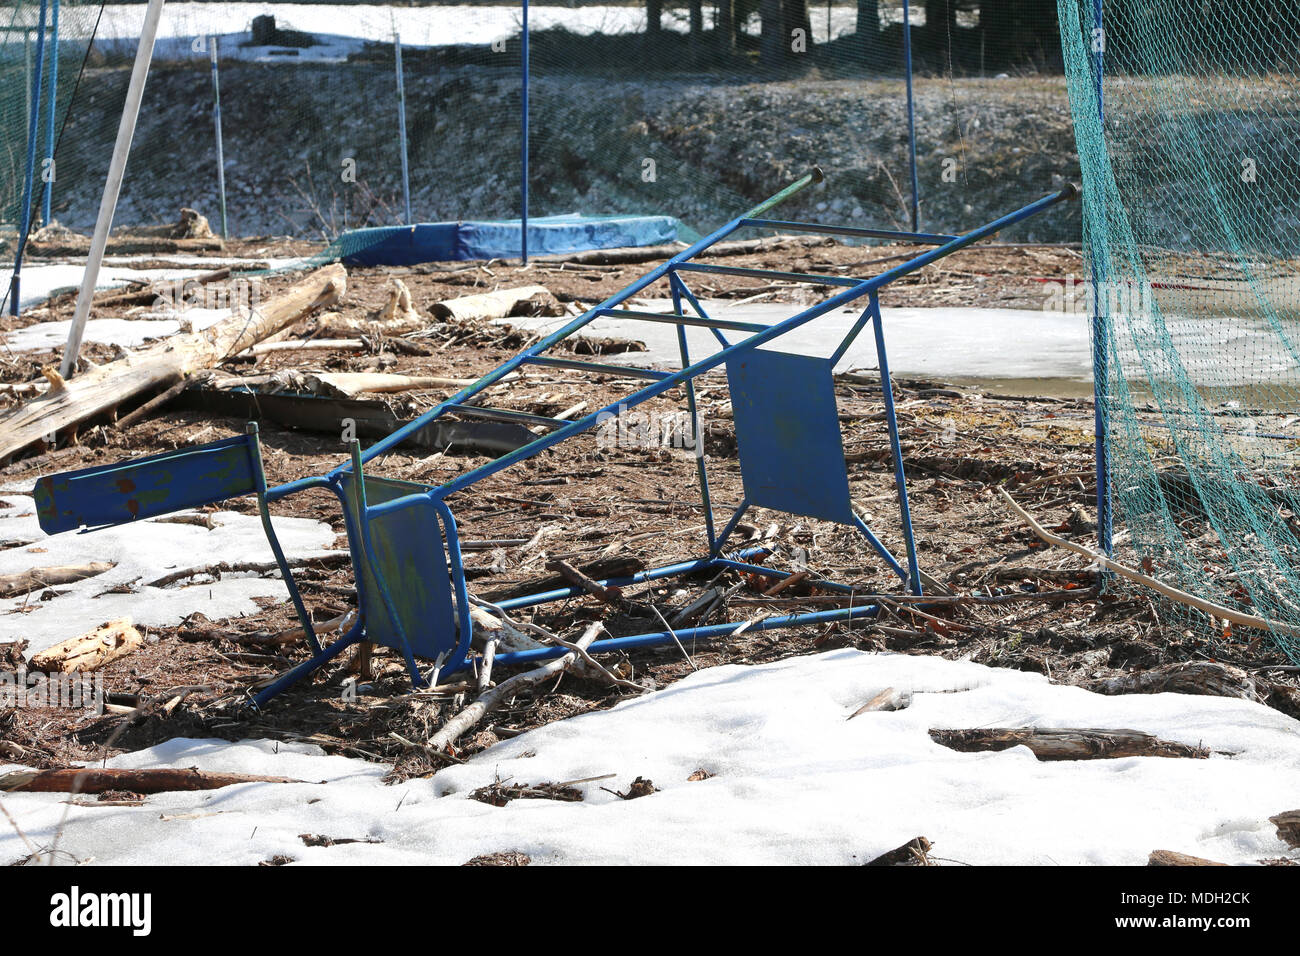 abandoned volleyball court completely destroyed with the judge's chair upside down Stock Photo